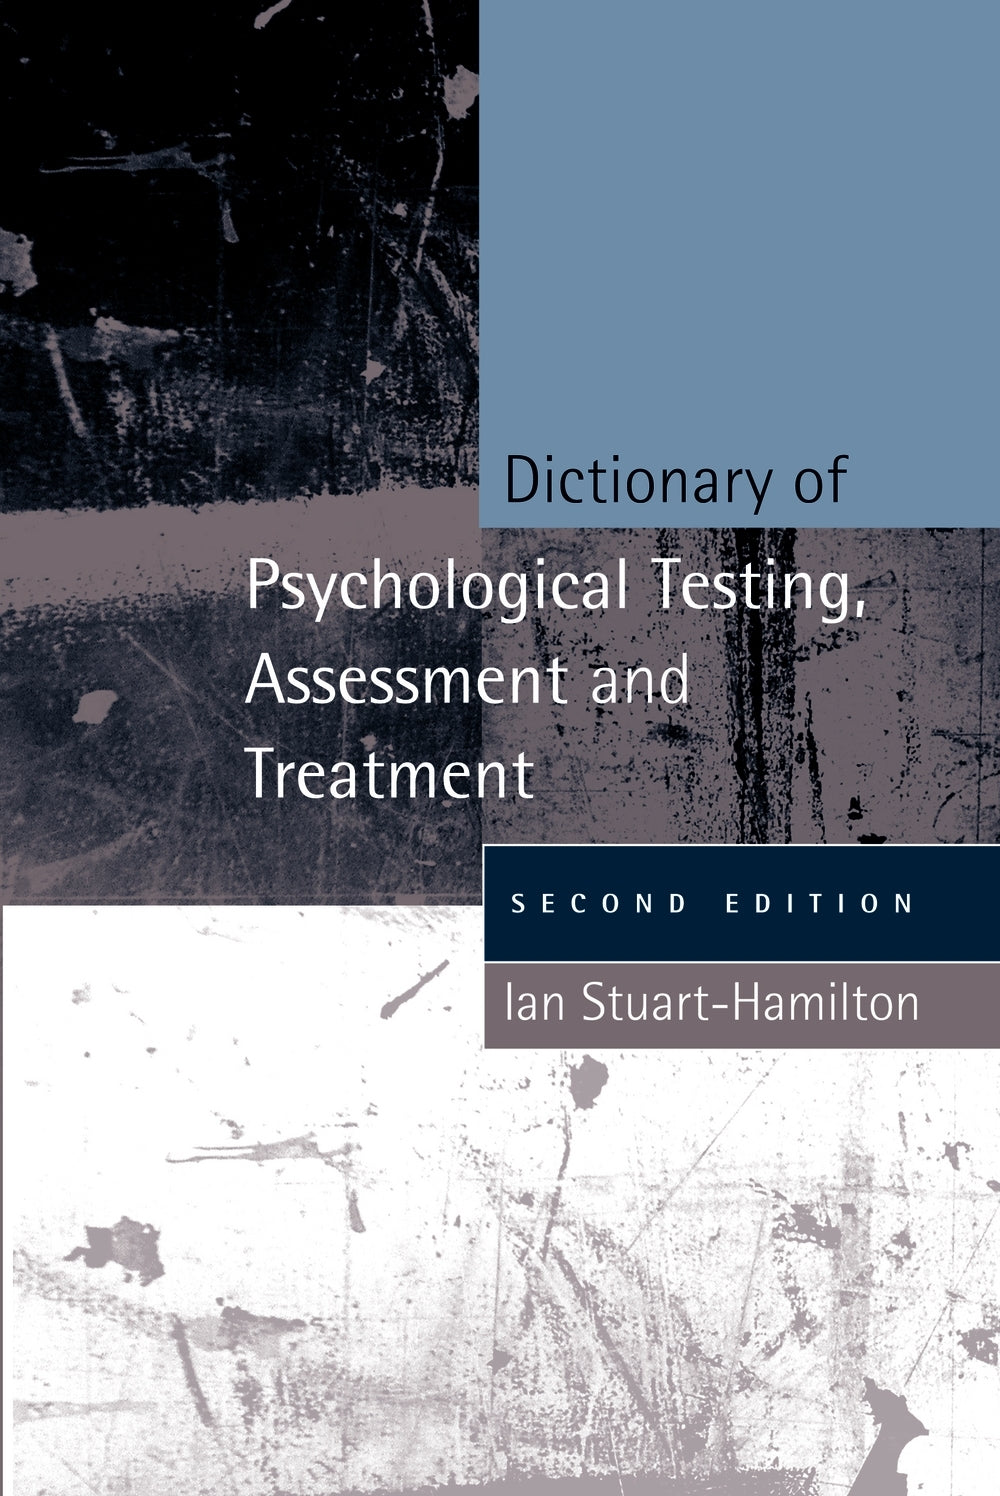 Dictionary of Psychological Testing, Assessment and Treatment by Ian Stuart-Hamilton